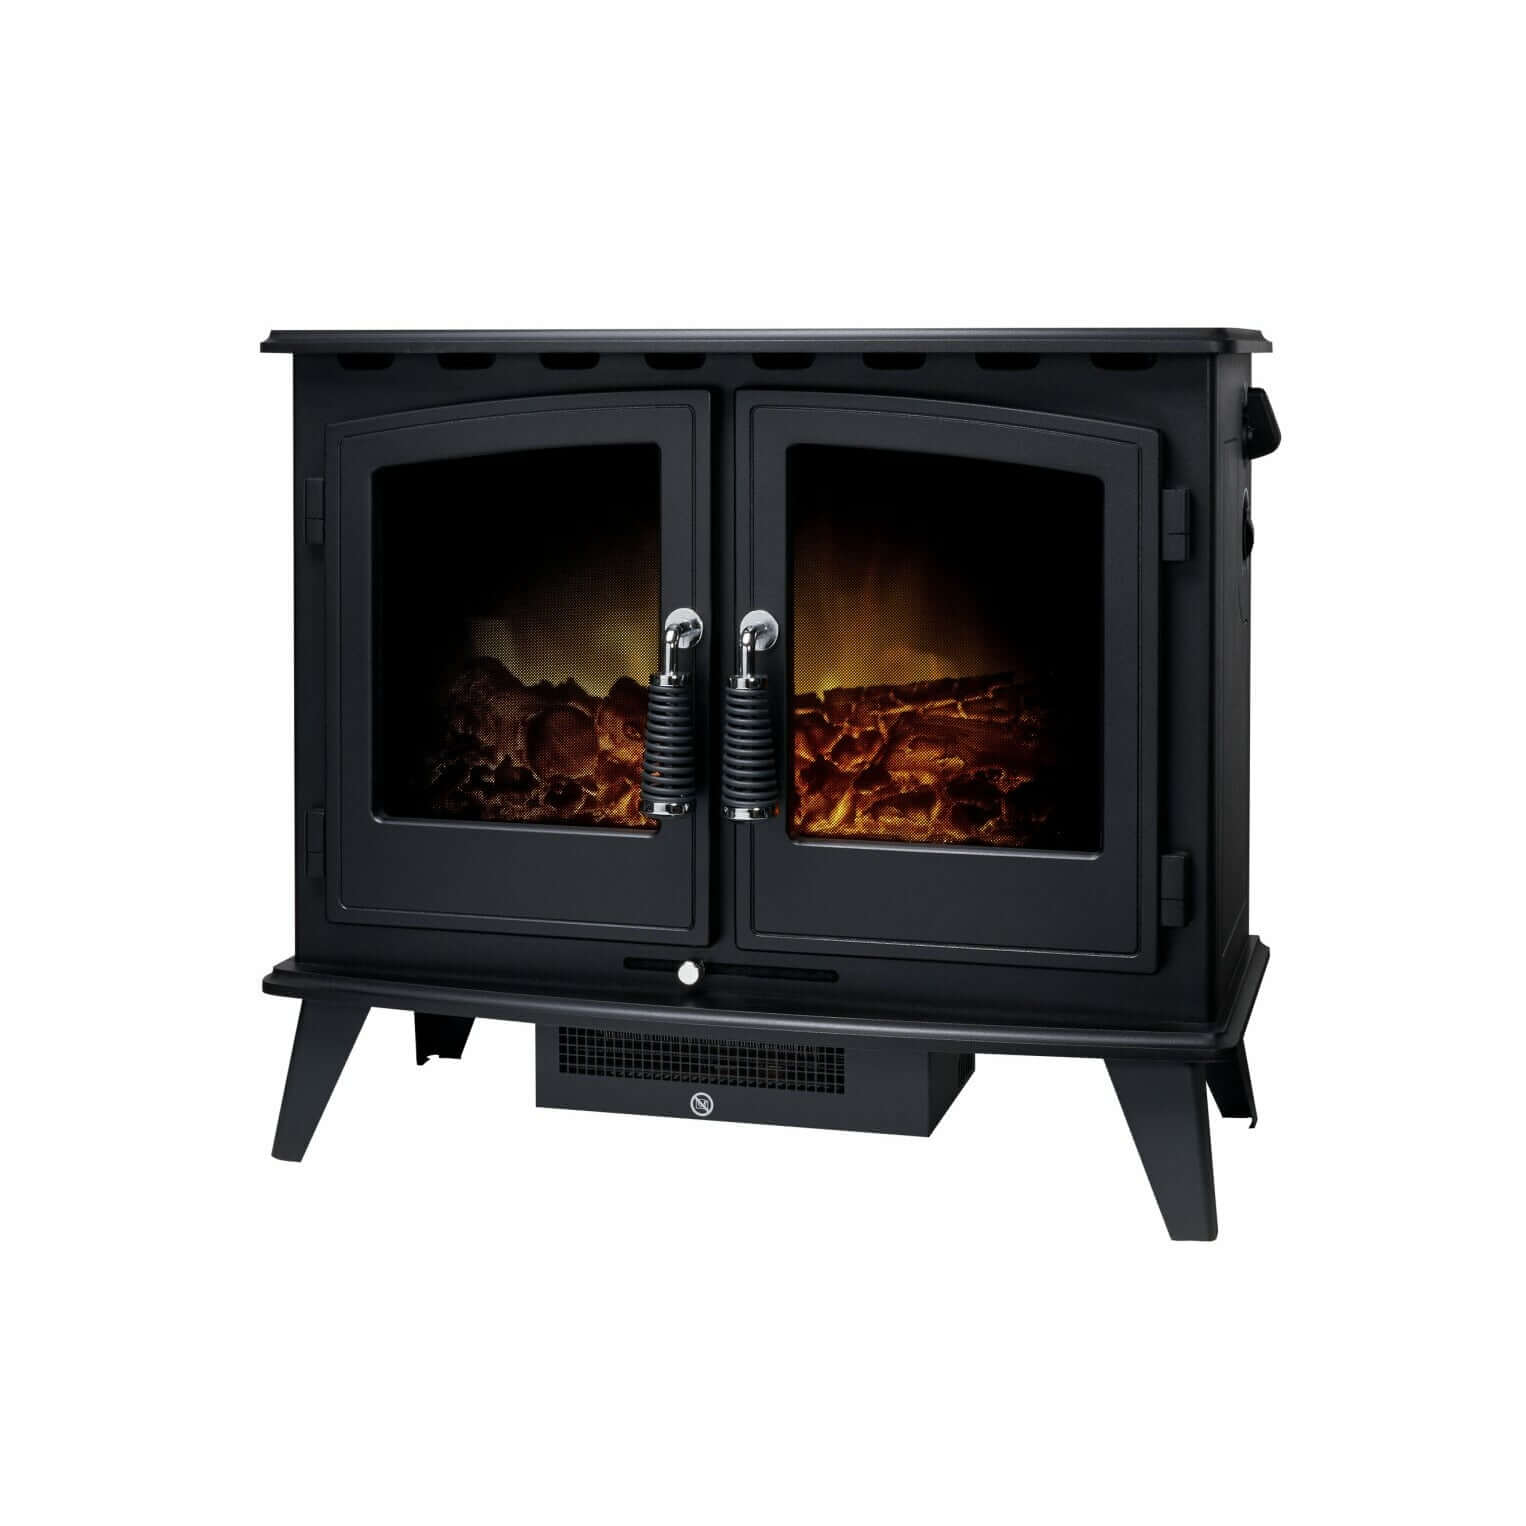 Adam Woodhouse Electric Stove in Black - Glowing Flame